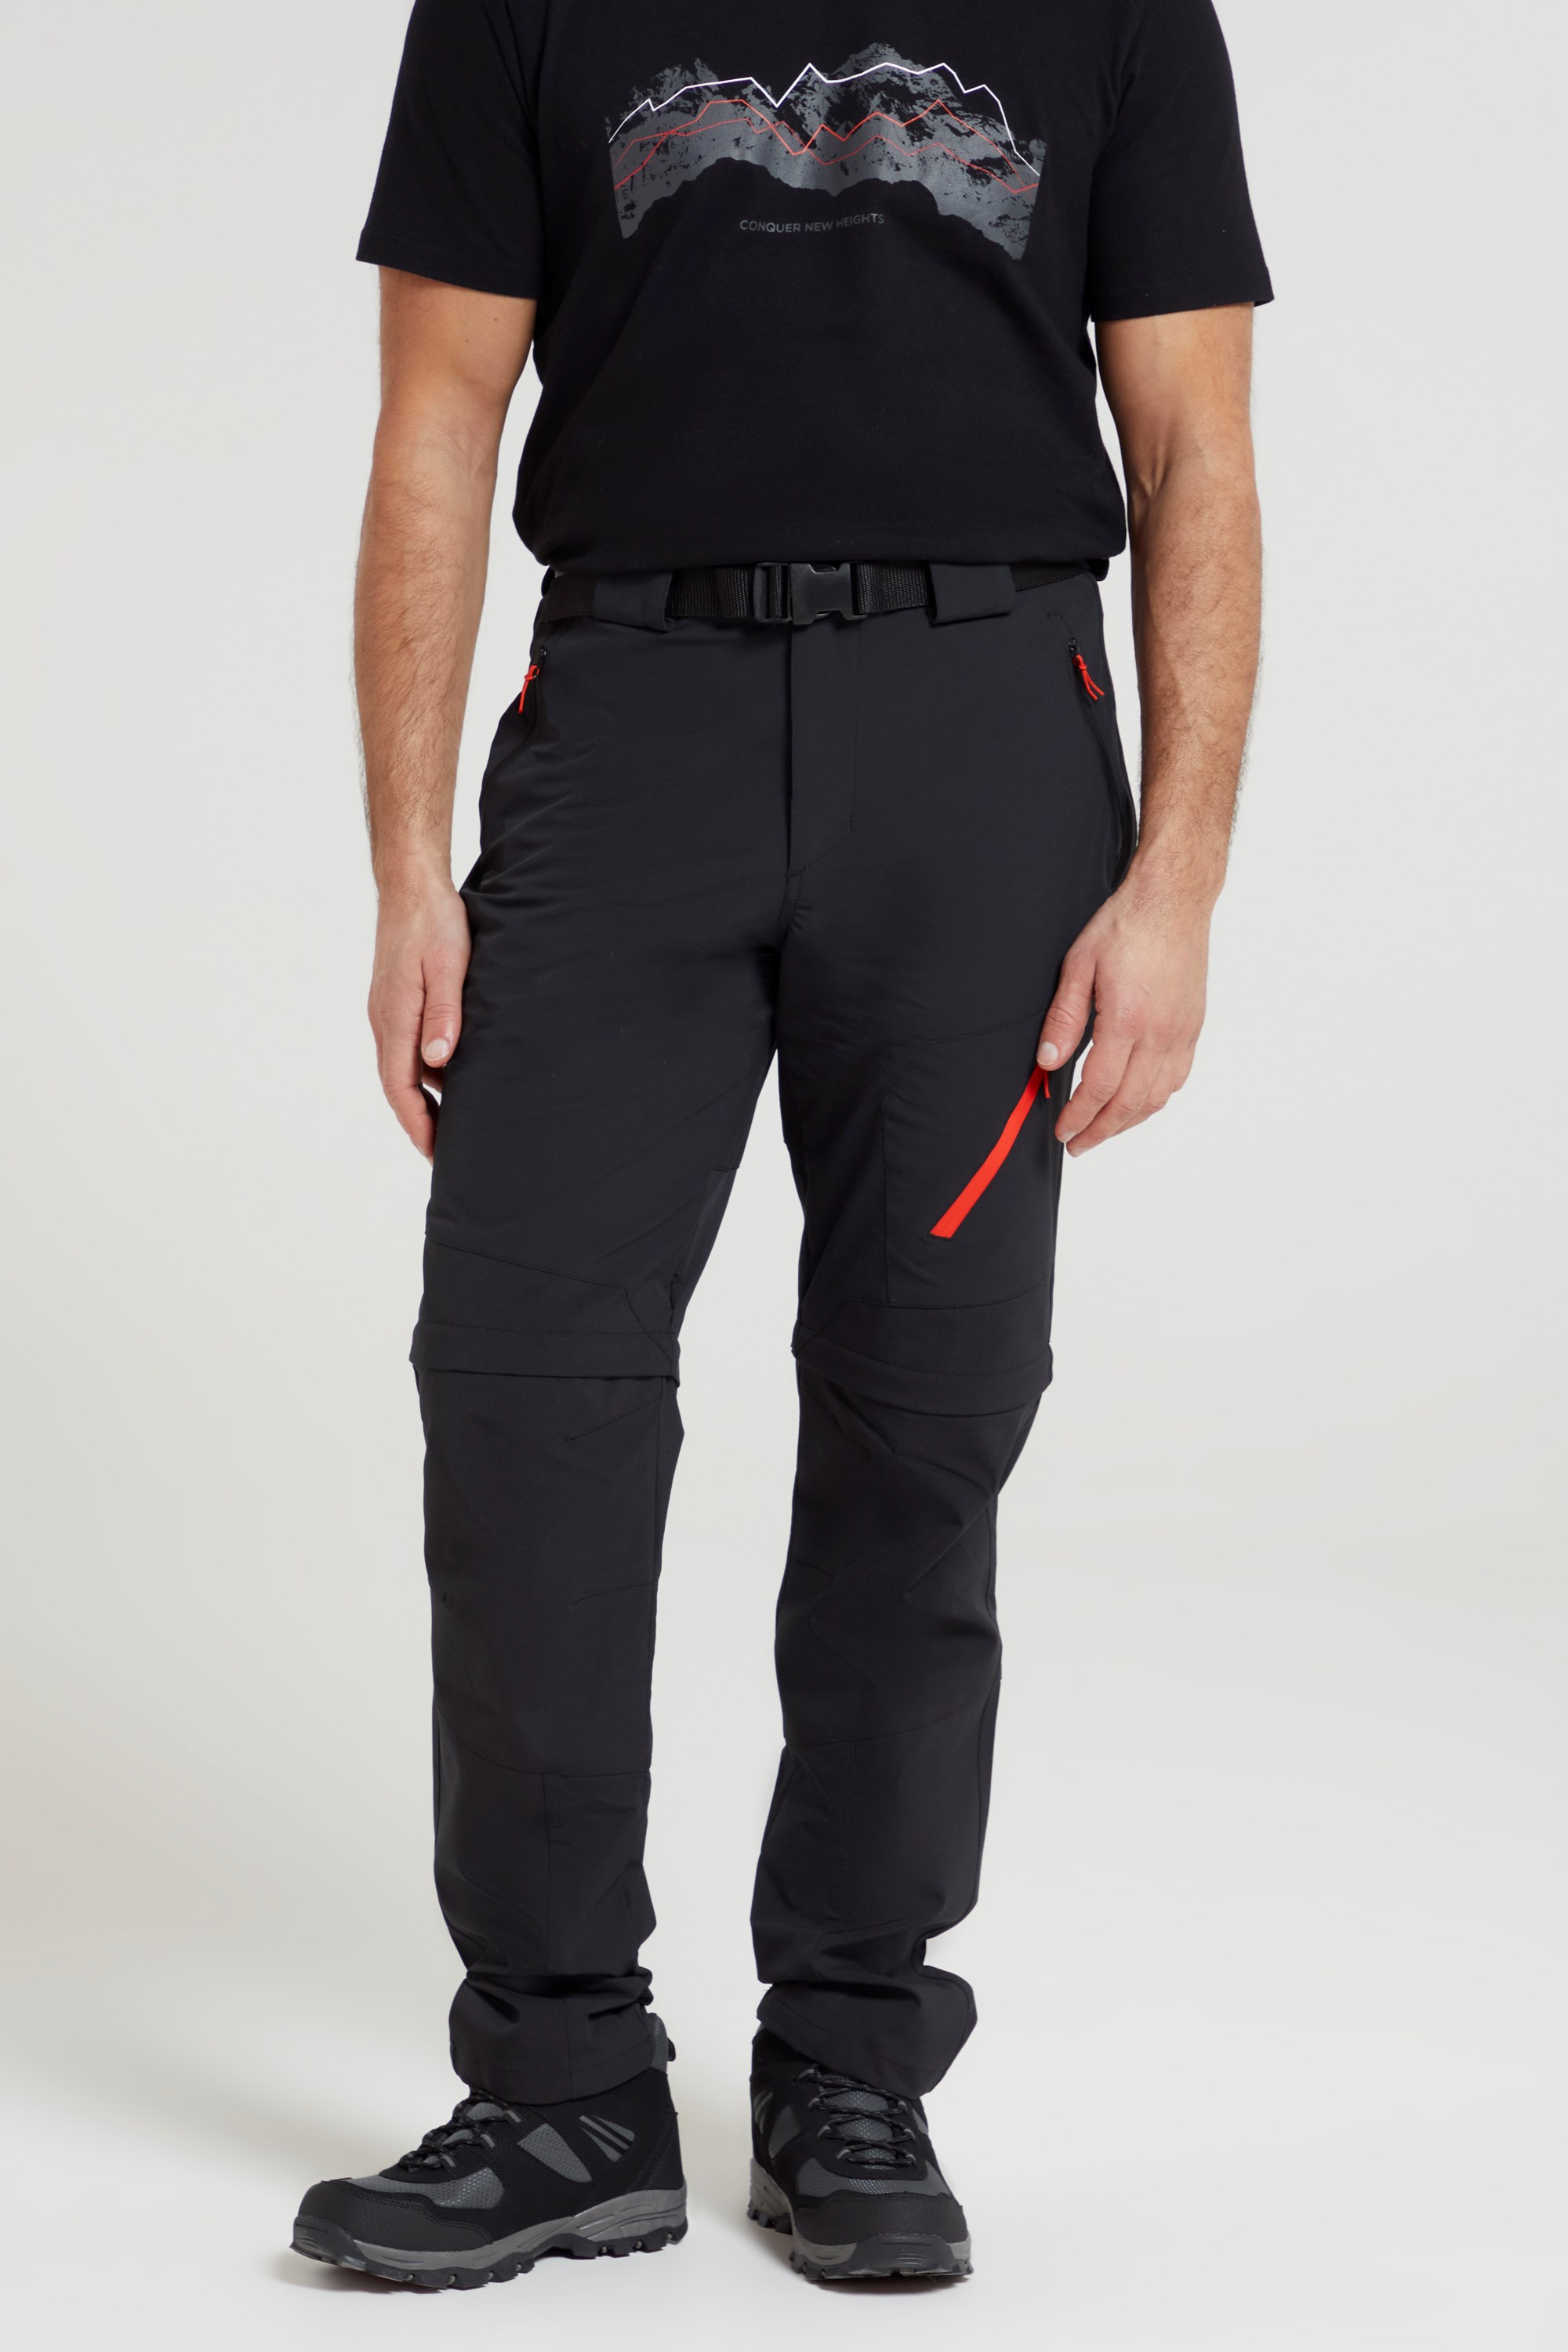 Convertible Pants Mens Closeout  Montbell Euro